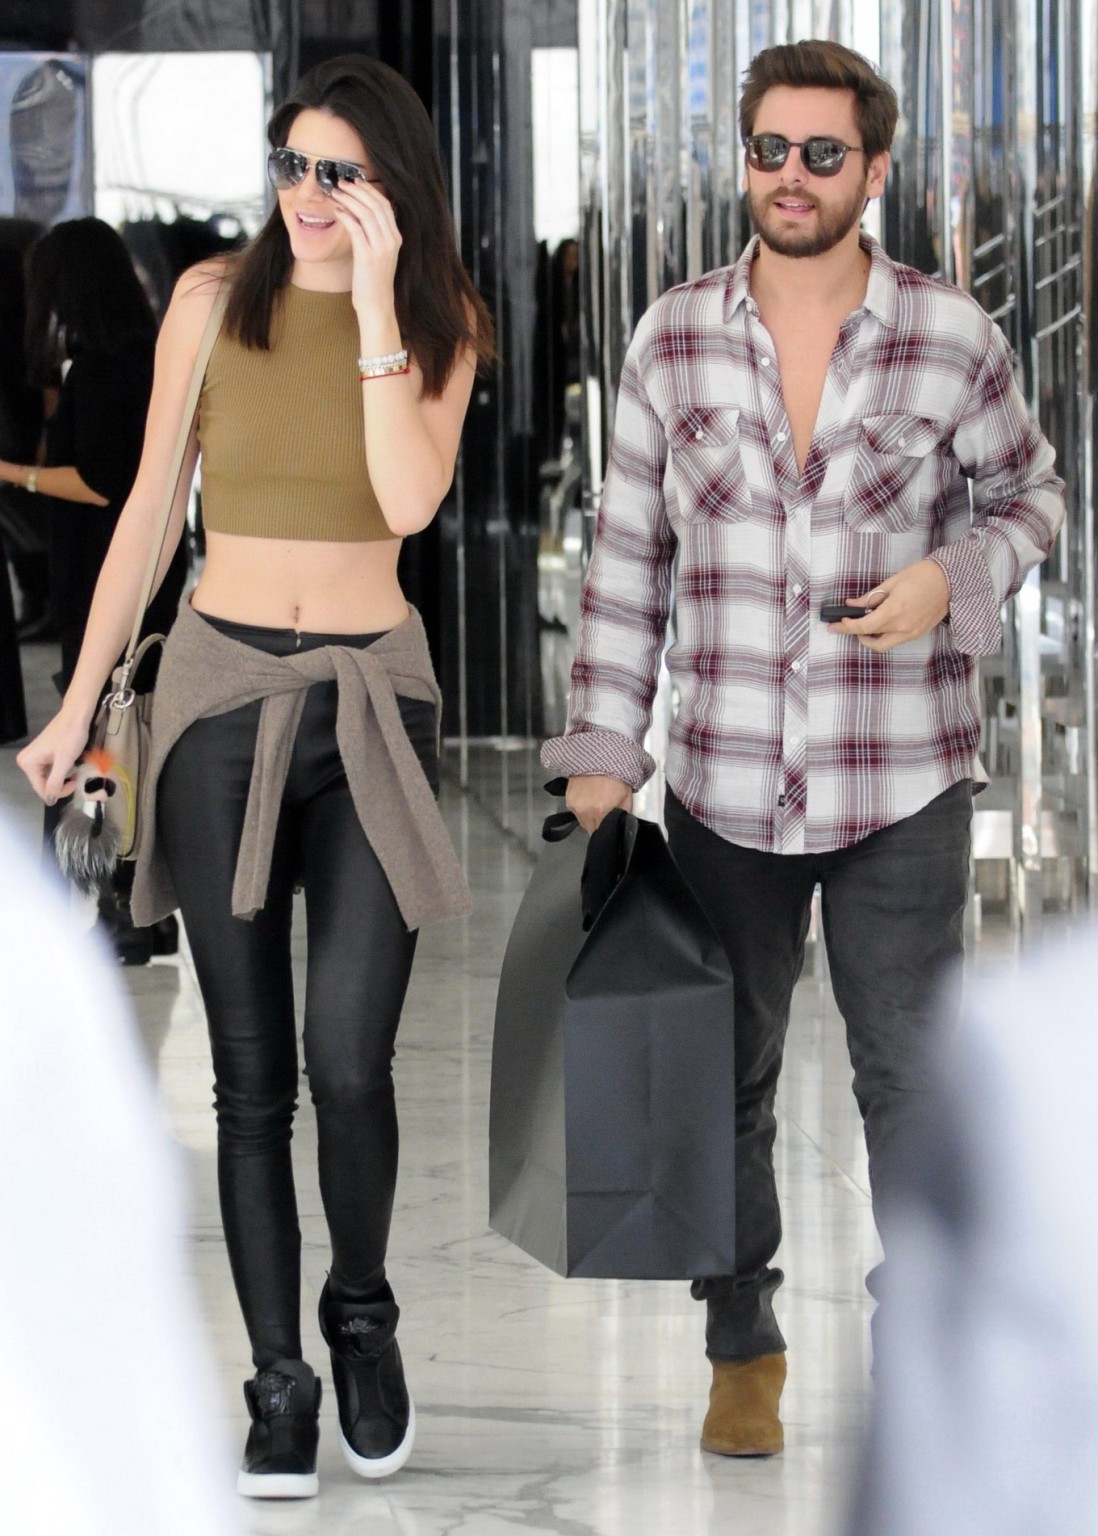 Kendall Jenner shows off her abs while shopping out in Beverly Hills #75177367